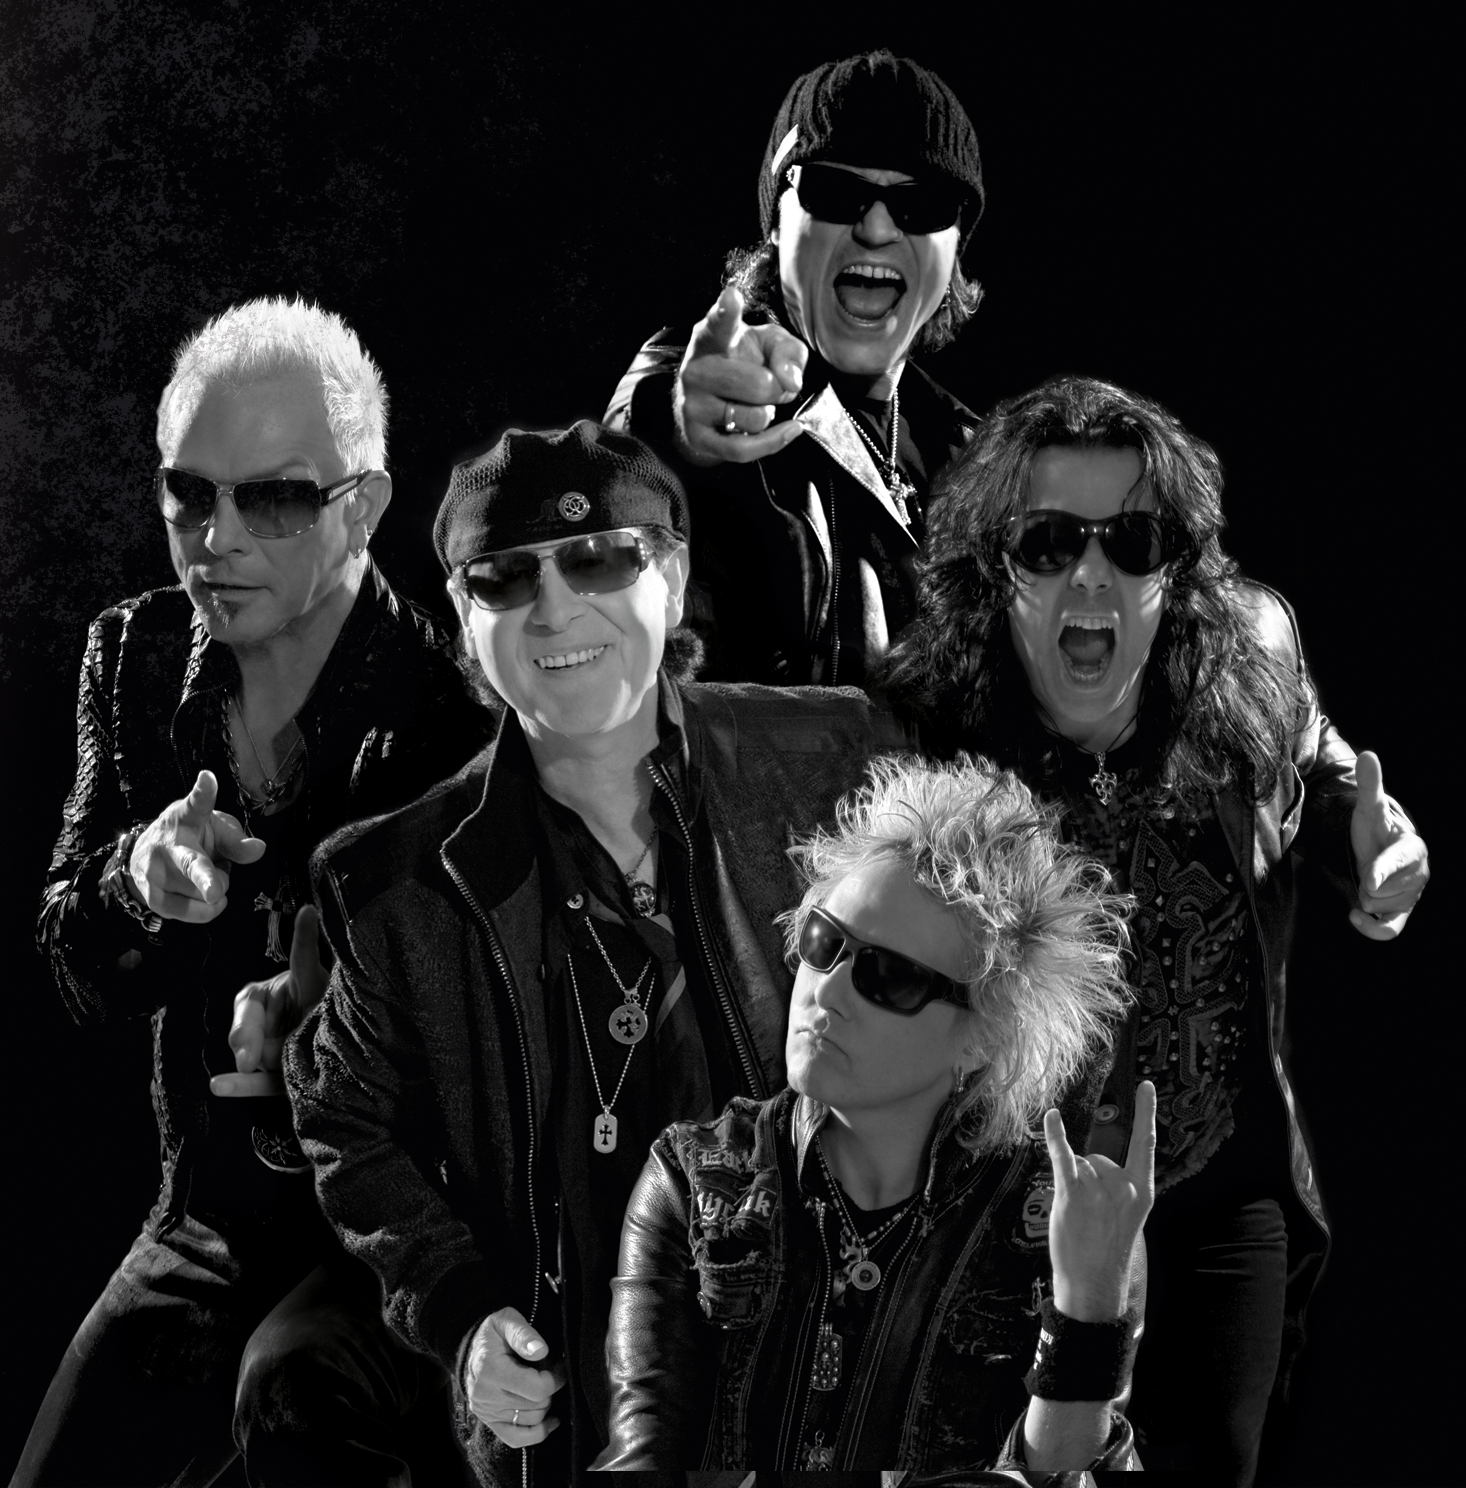 Music Scorpions 2560x1600px – 100% Quality HD Wallpapers